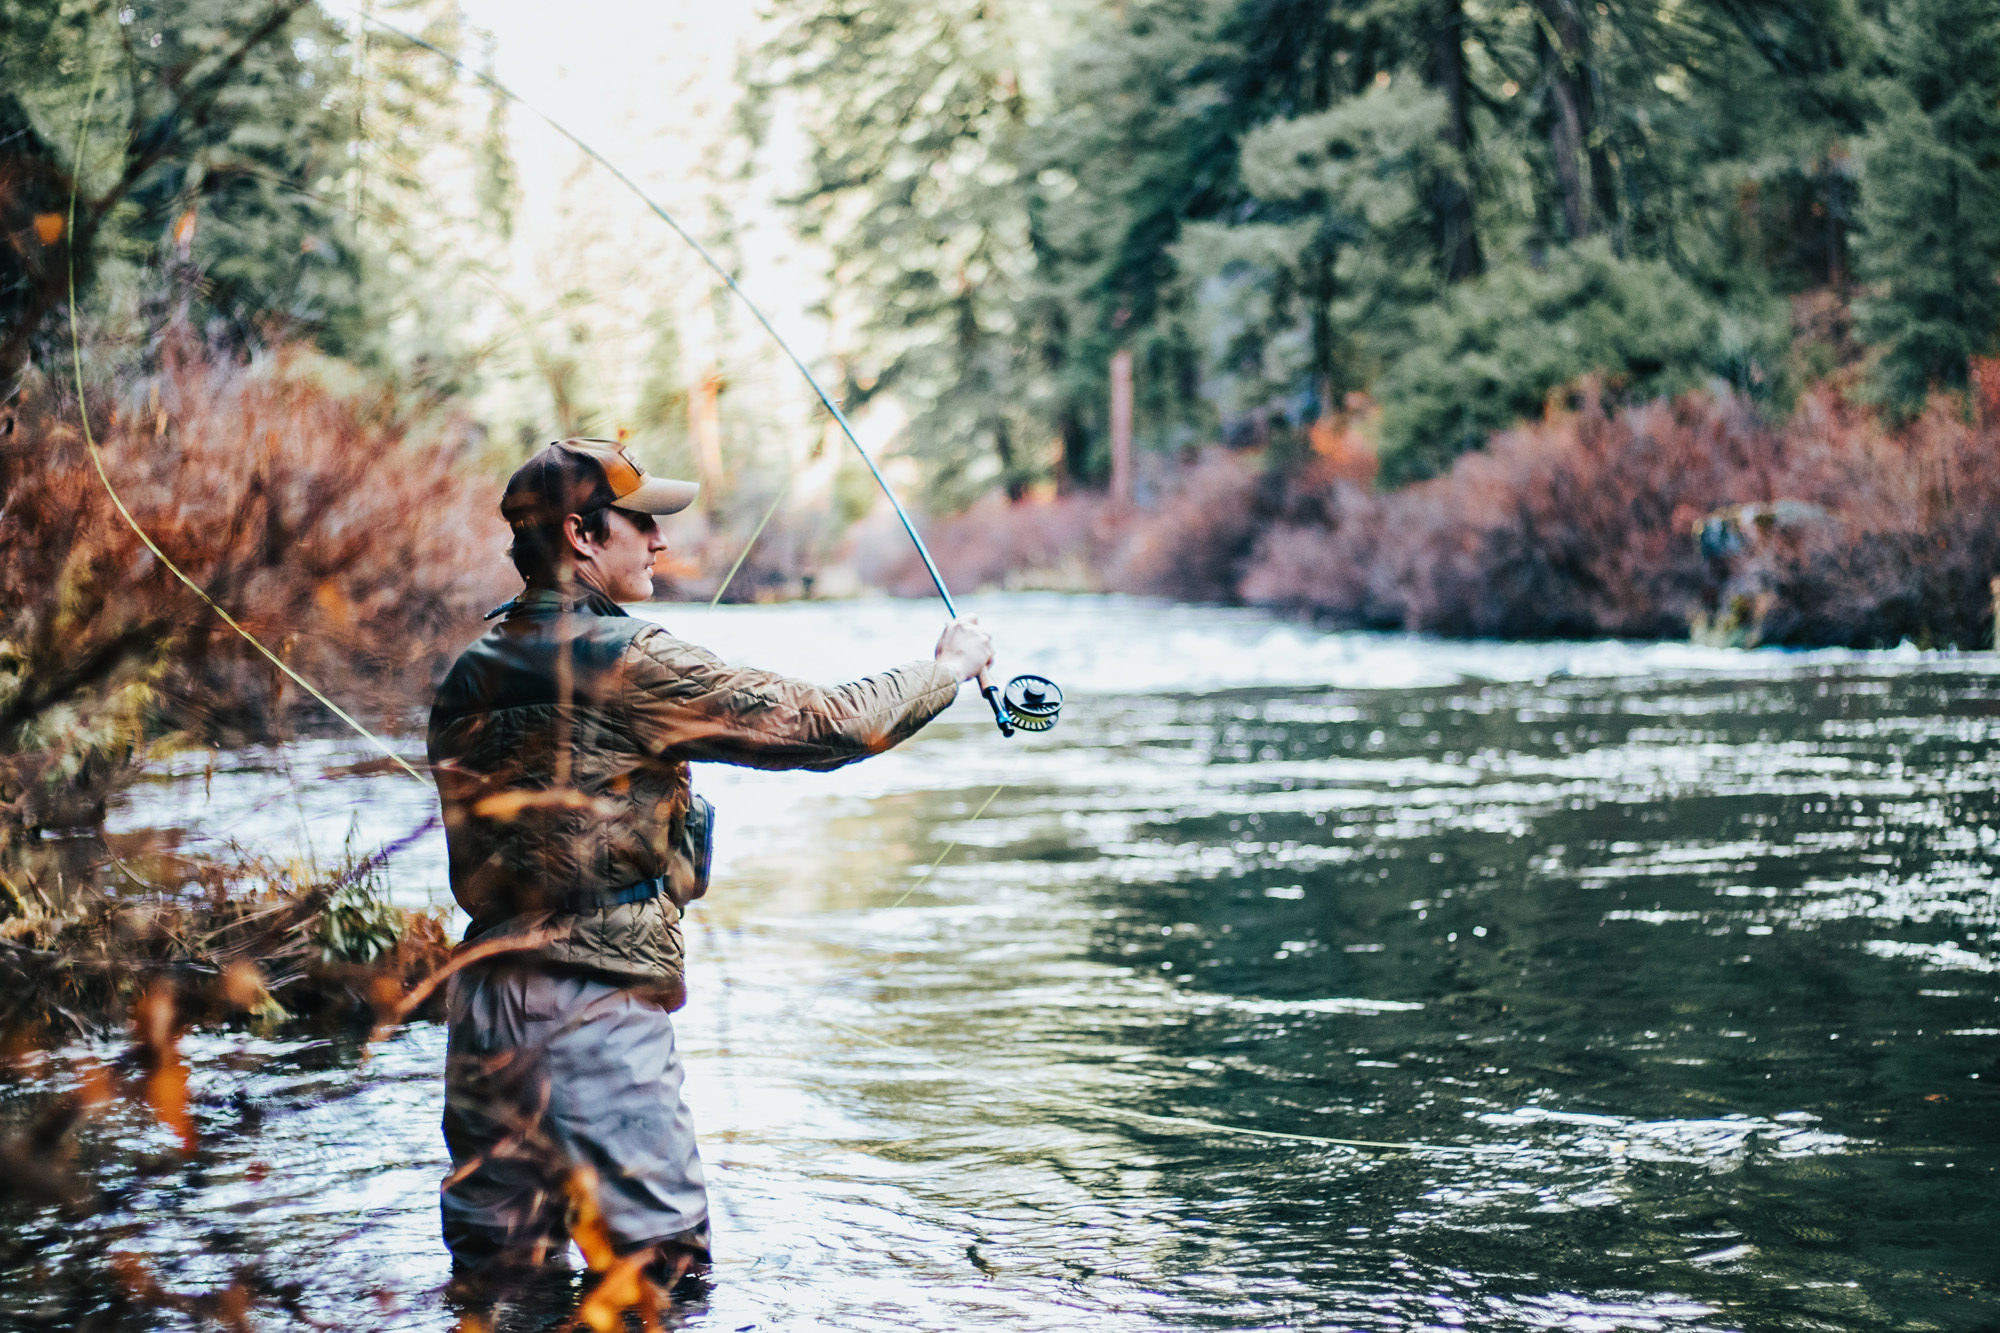 All about All Valley Angler's guided fly fishing experiences